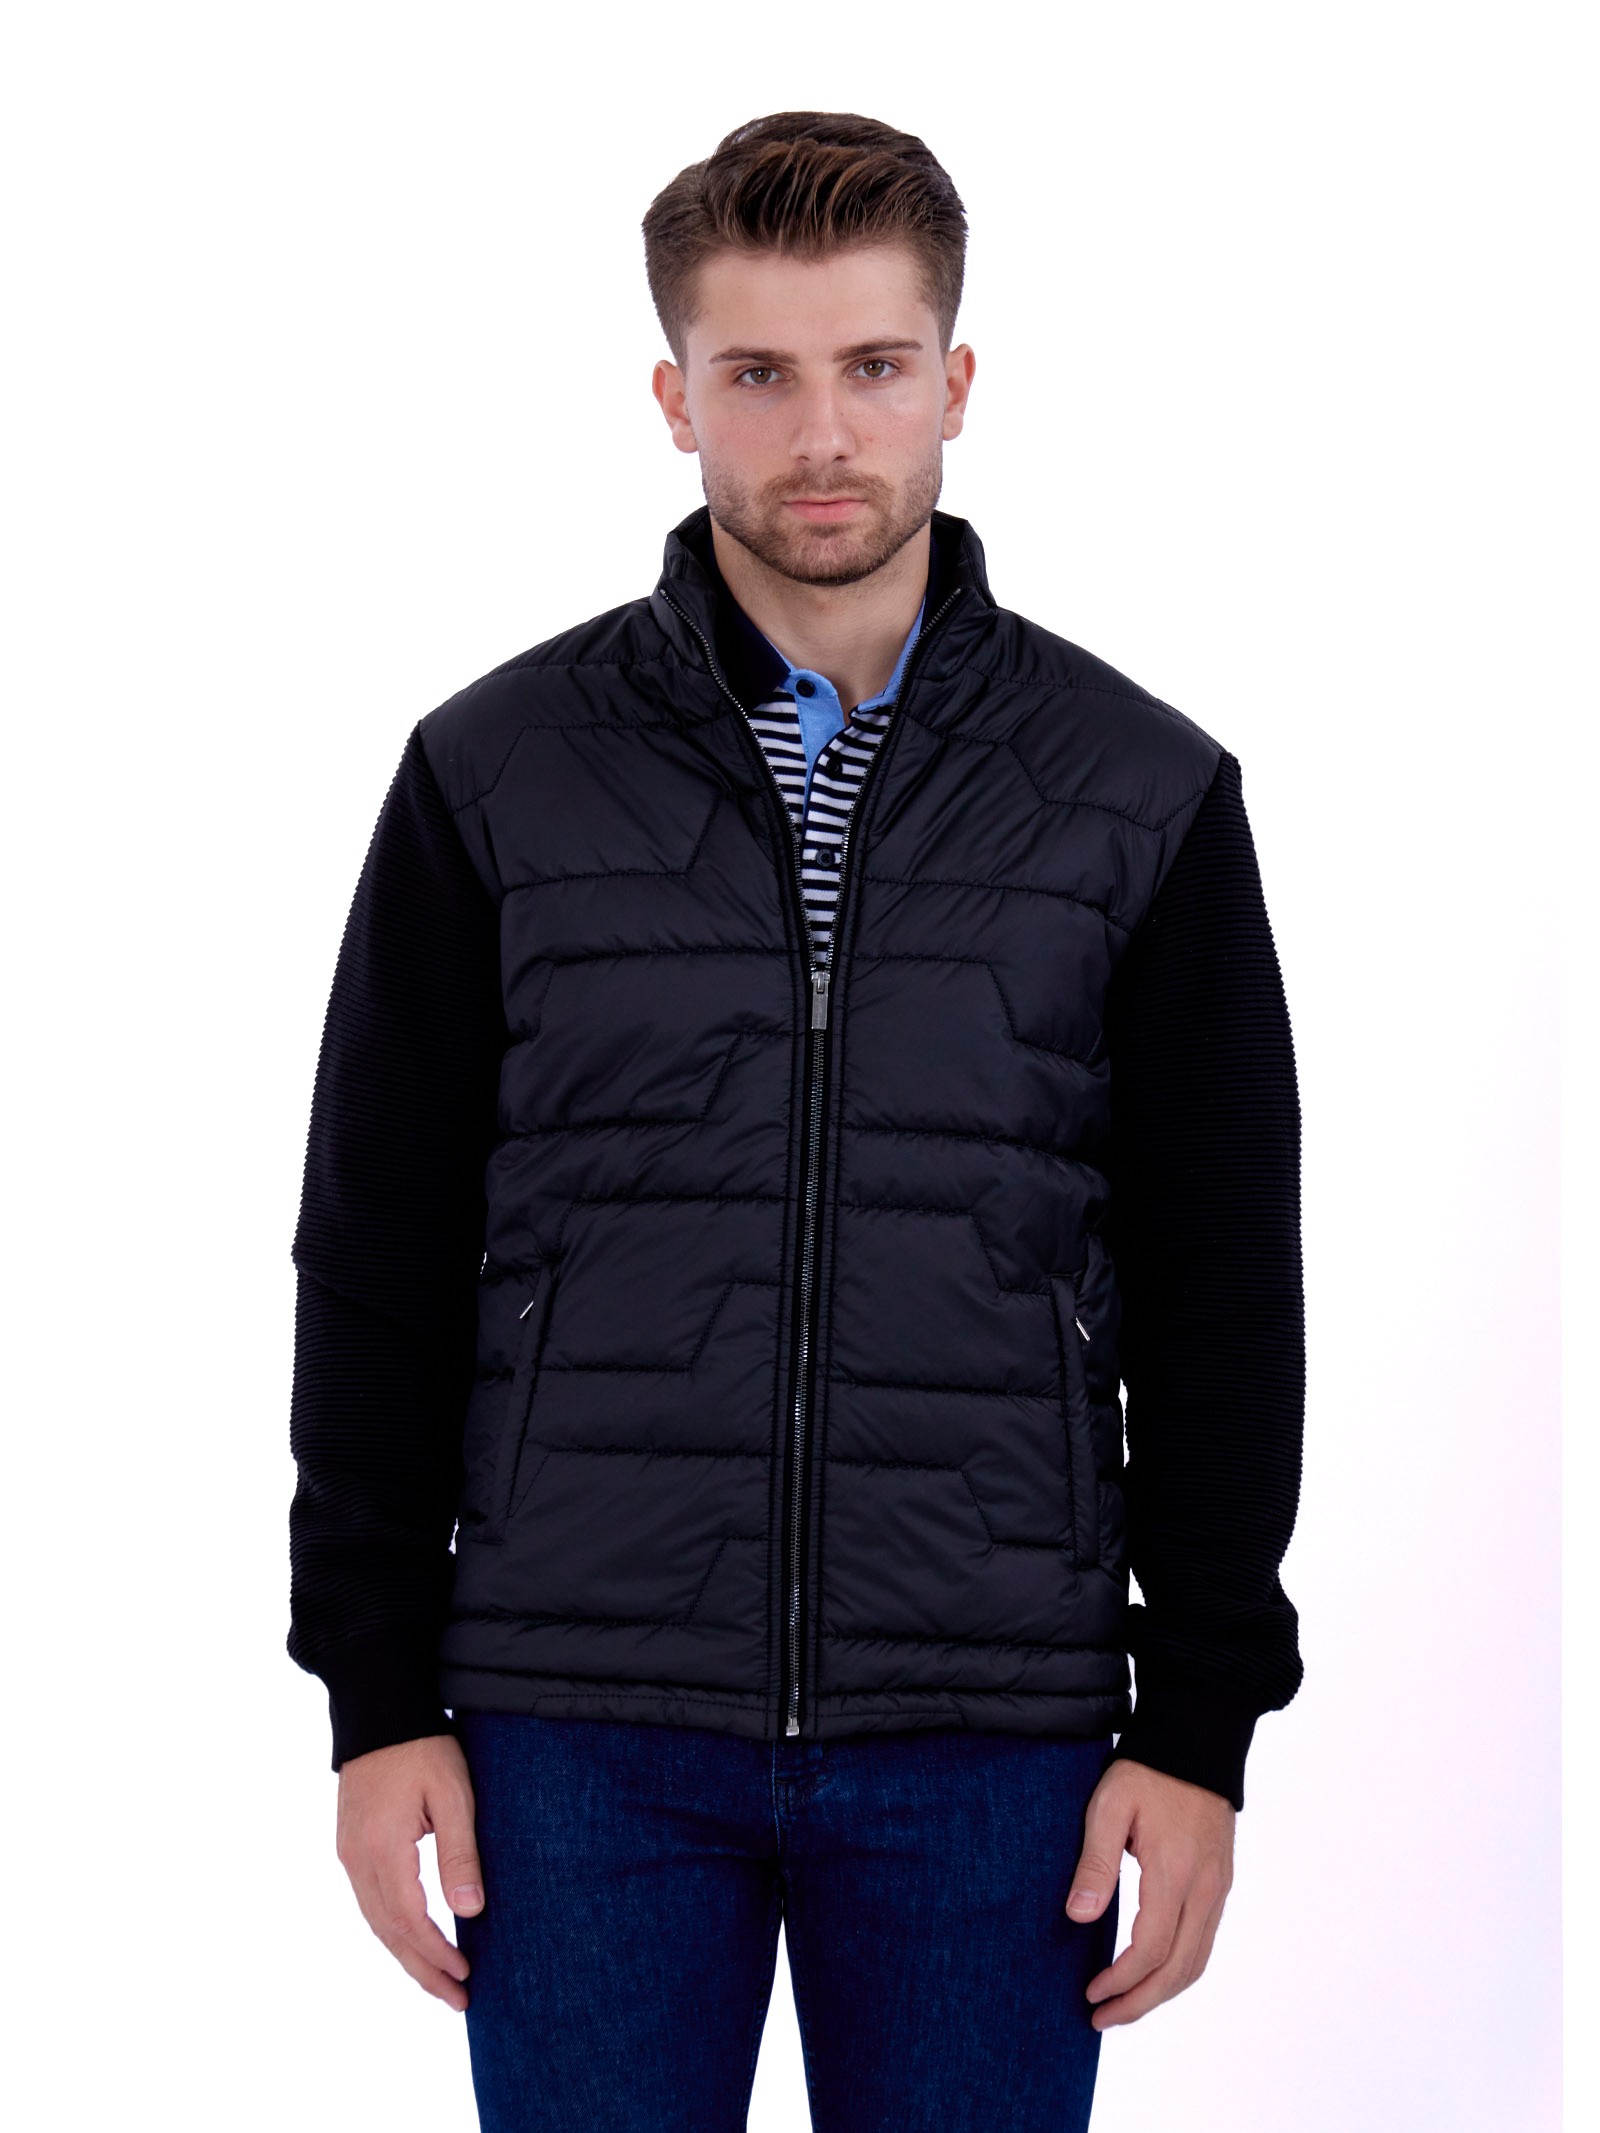 Winter jacket with knitted sleeves Black